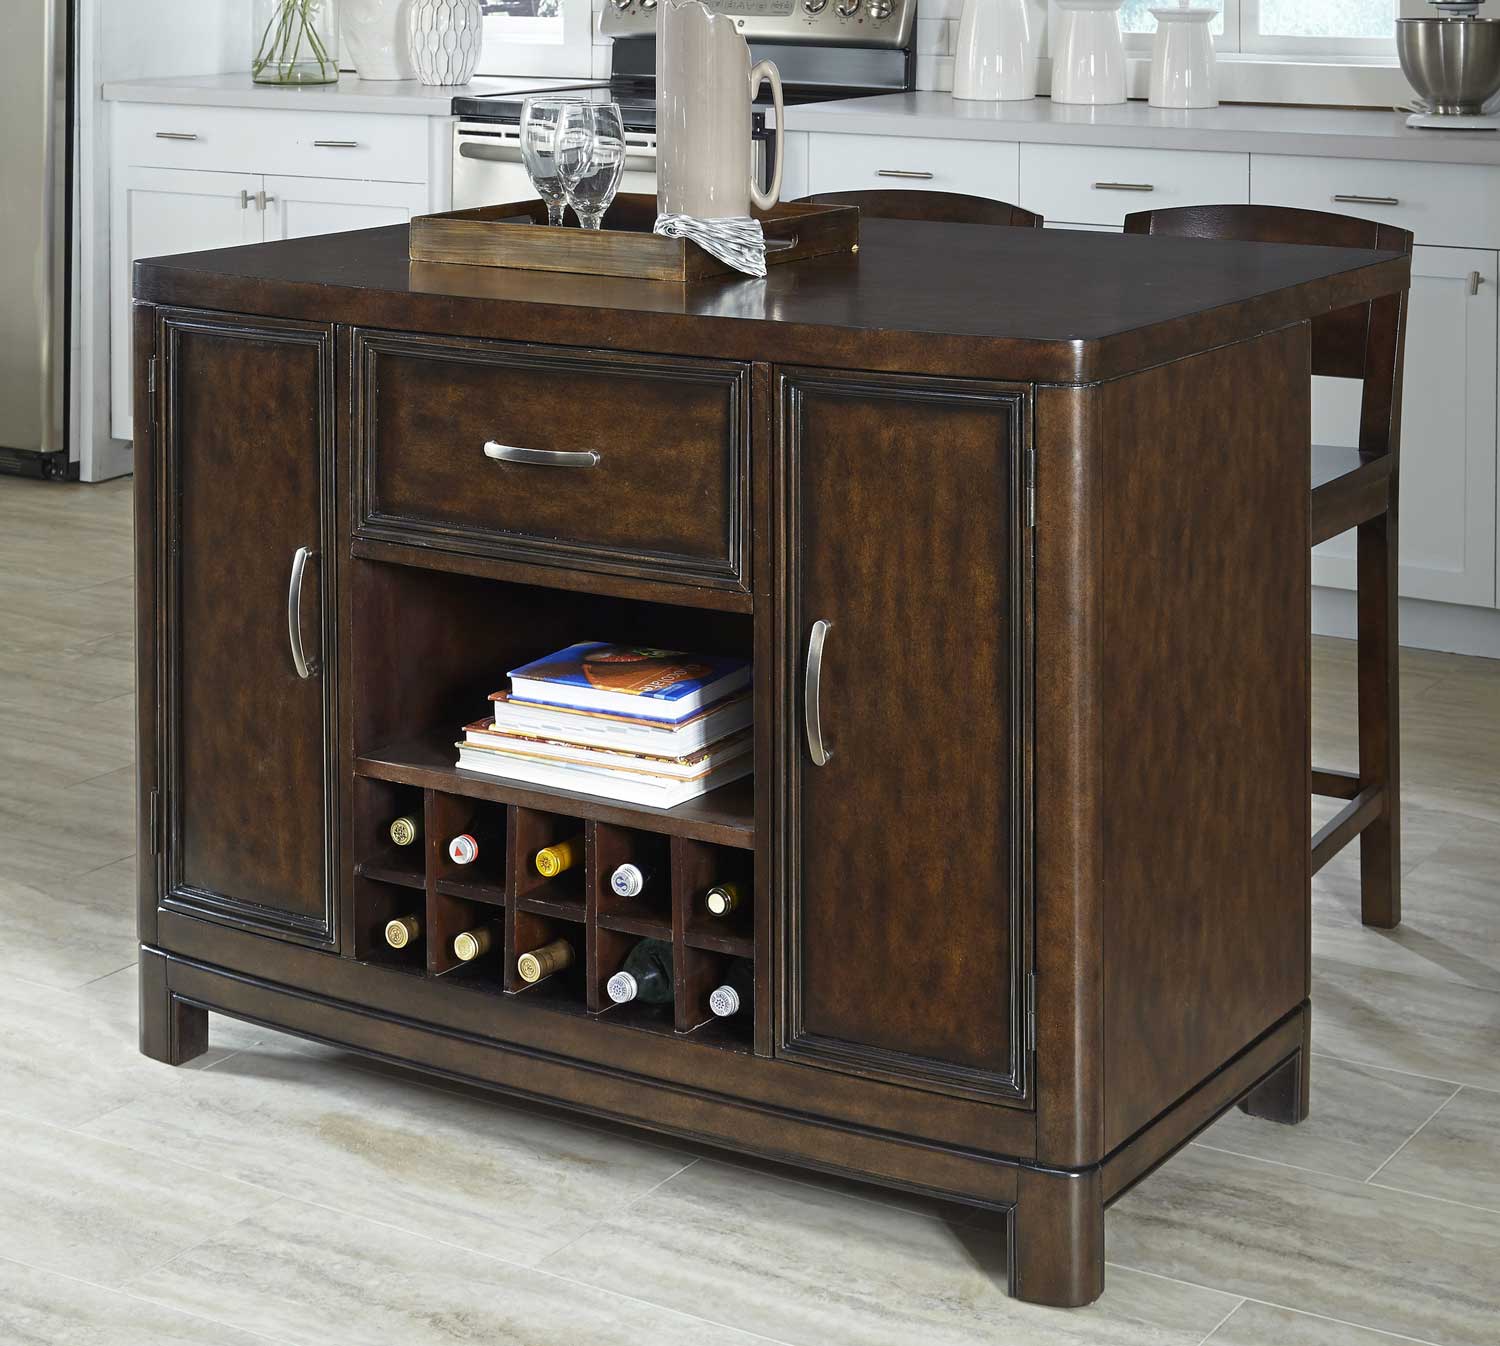 Home Styles Crescent Hill Kitchen Island and Two Stools - Two-tone tortoise shell